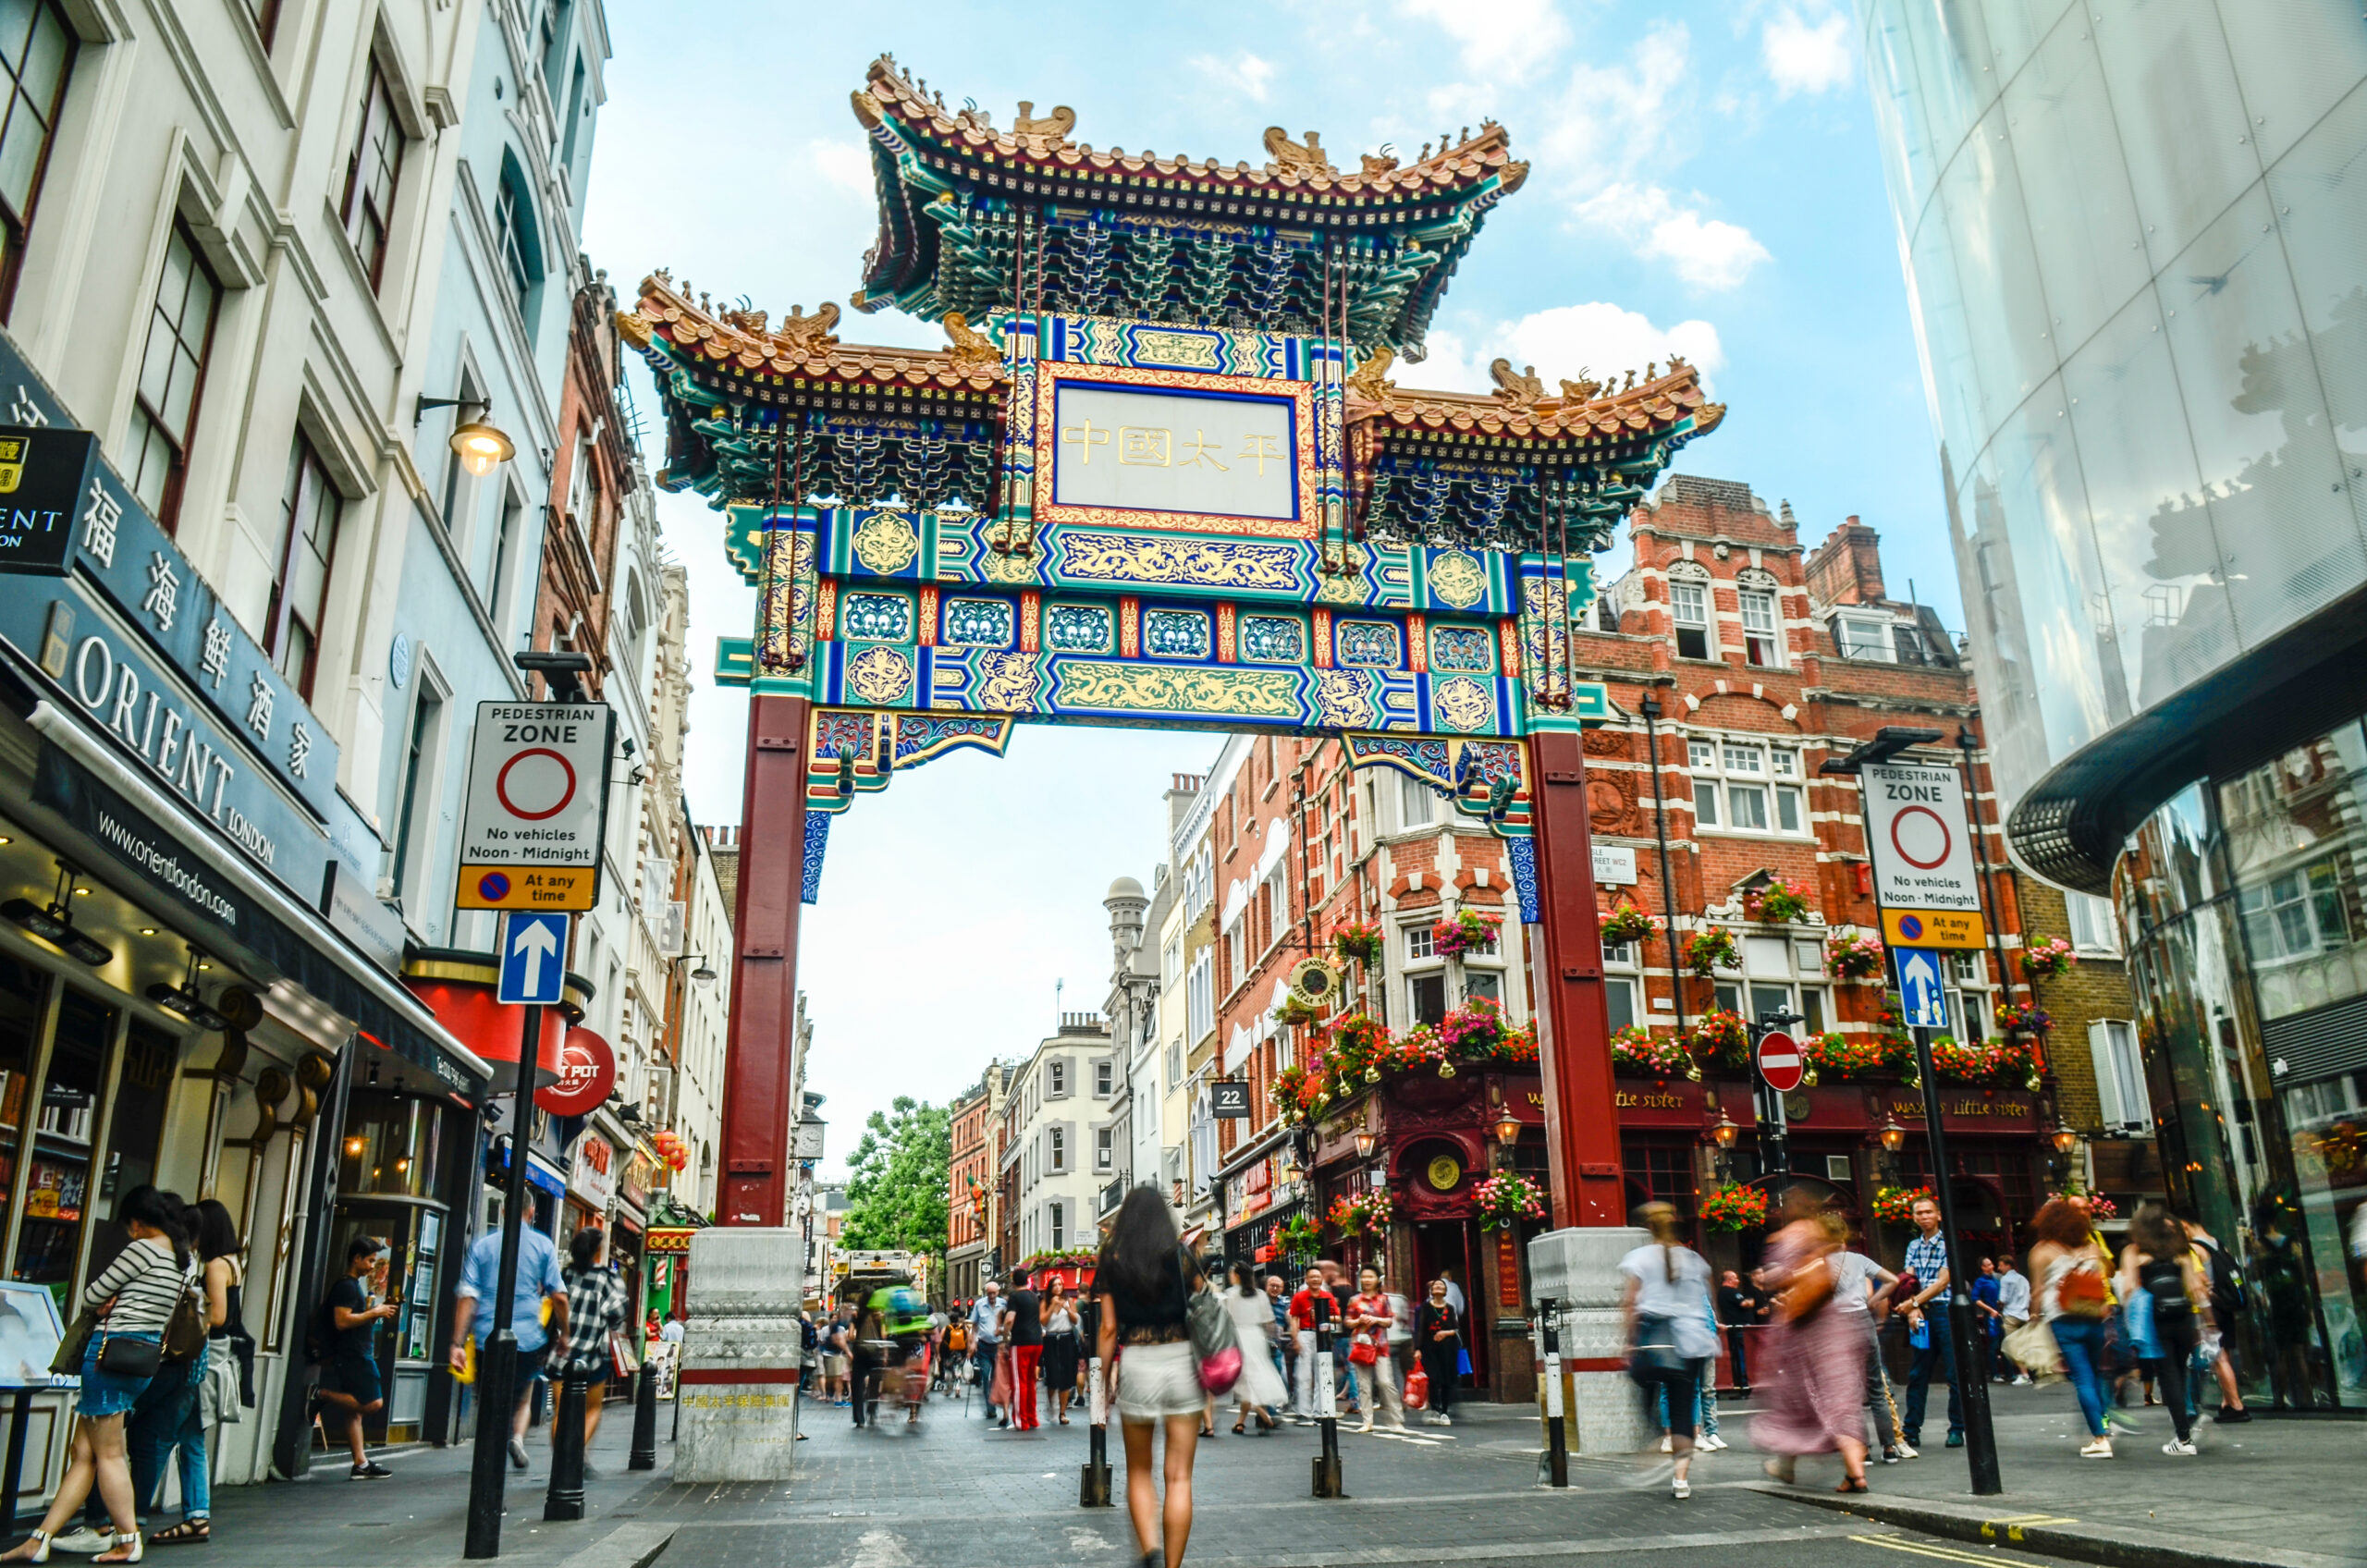 Crowds of people in London's China Town area of Soho in the west end.